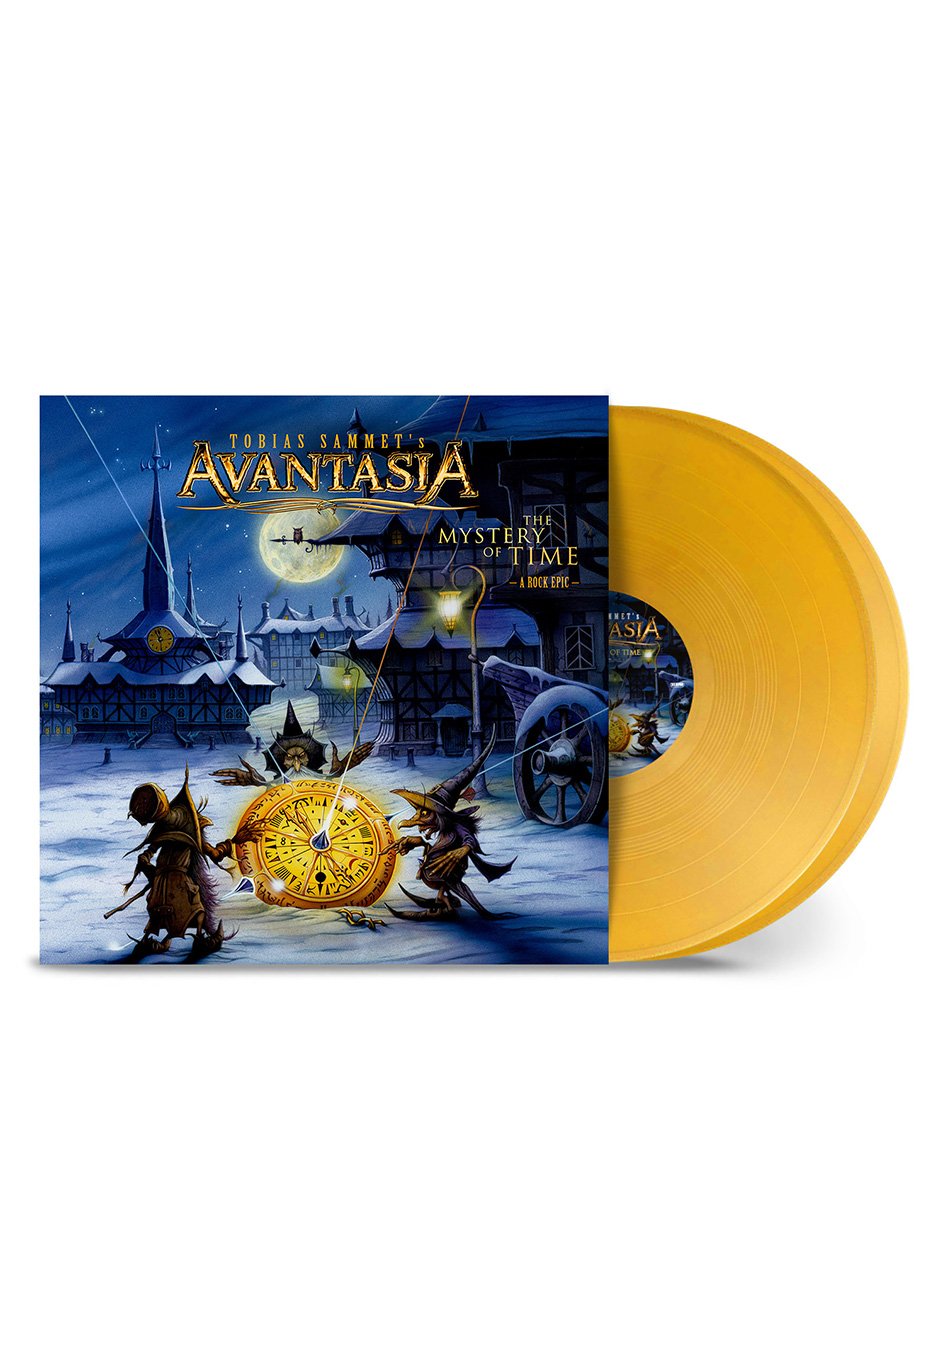 Avantasia - The Mistery Of Time (10 Years Anniversary) Ltd. Red Gold - Colored 2 Vinyl